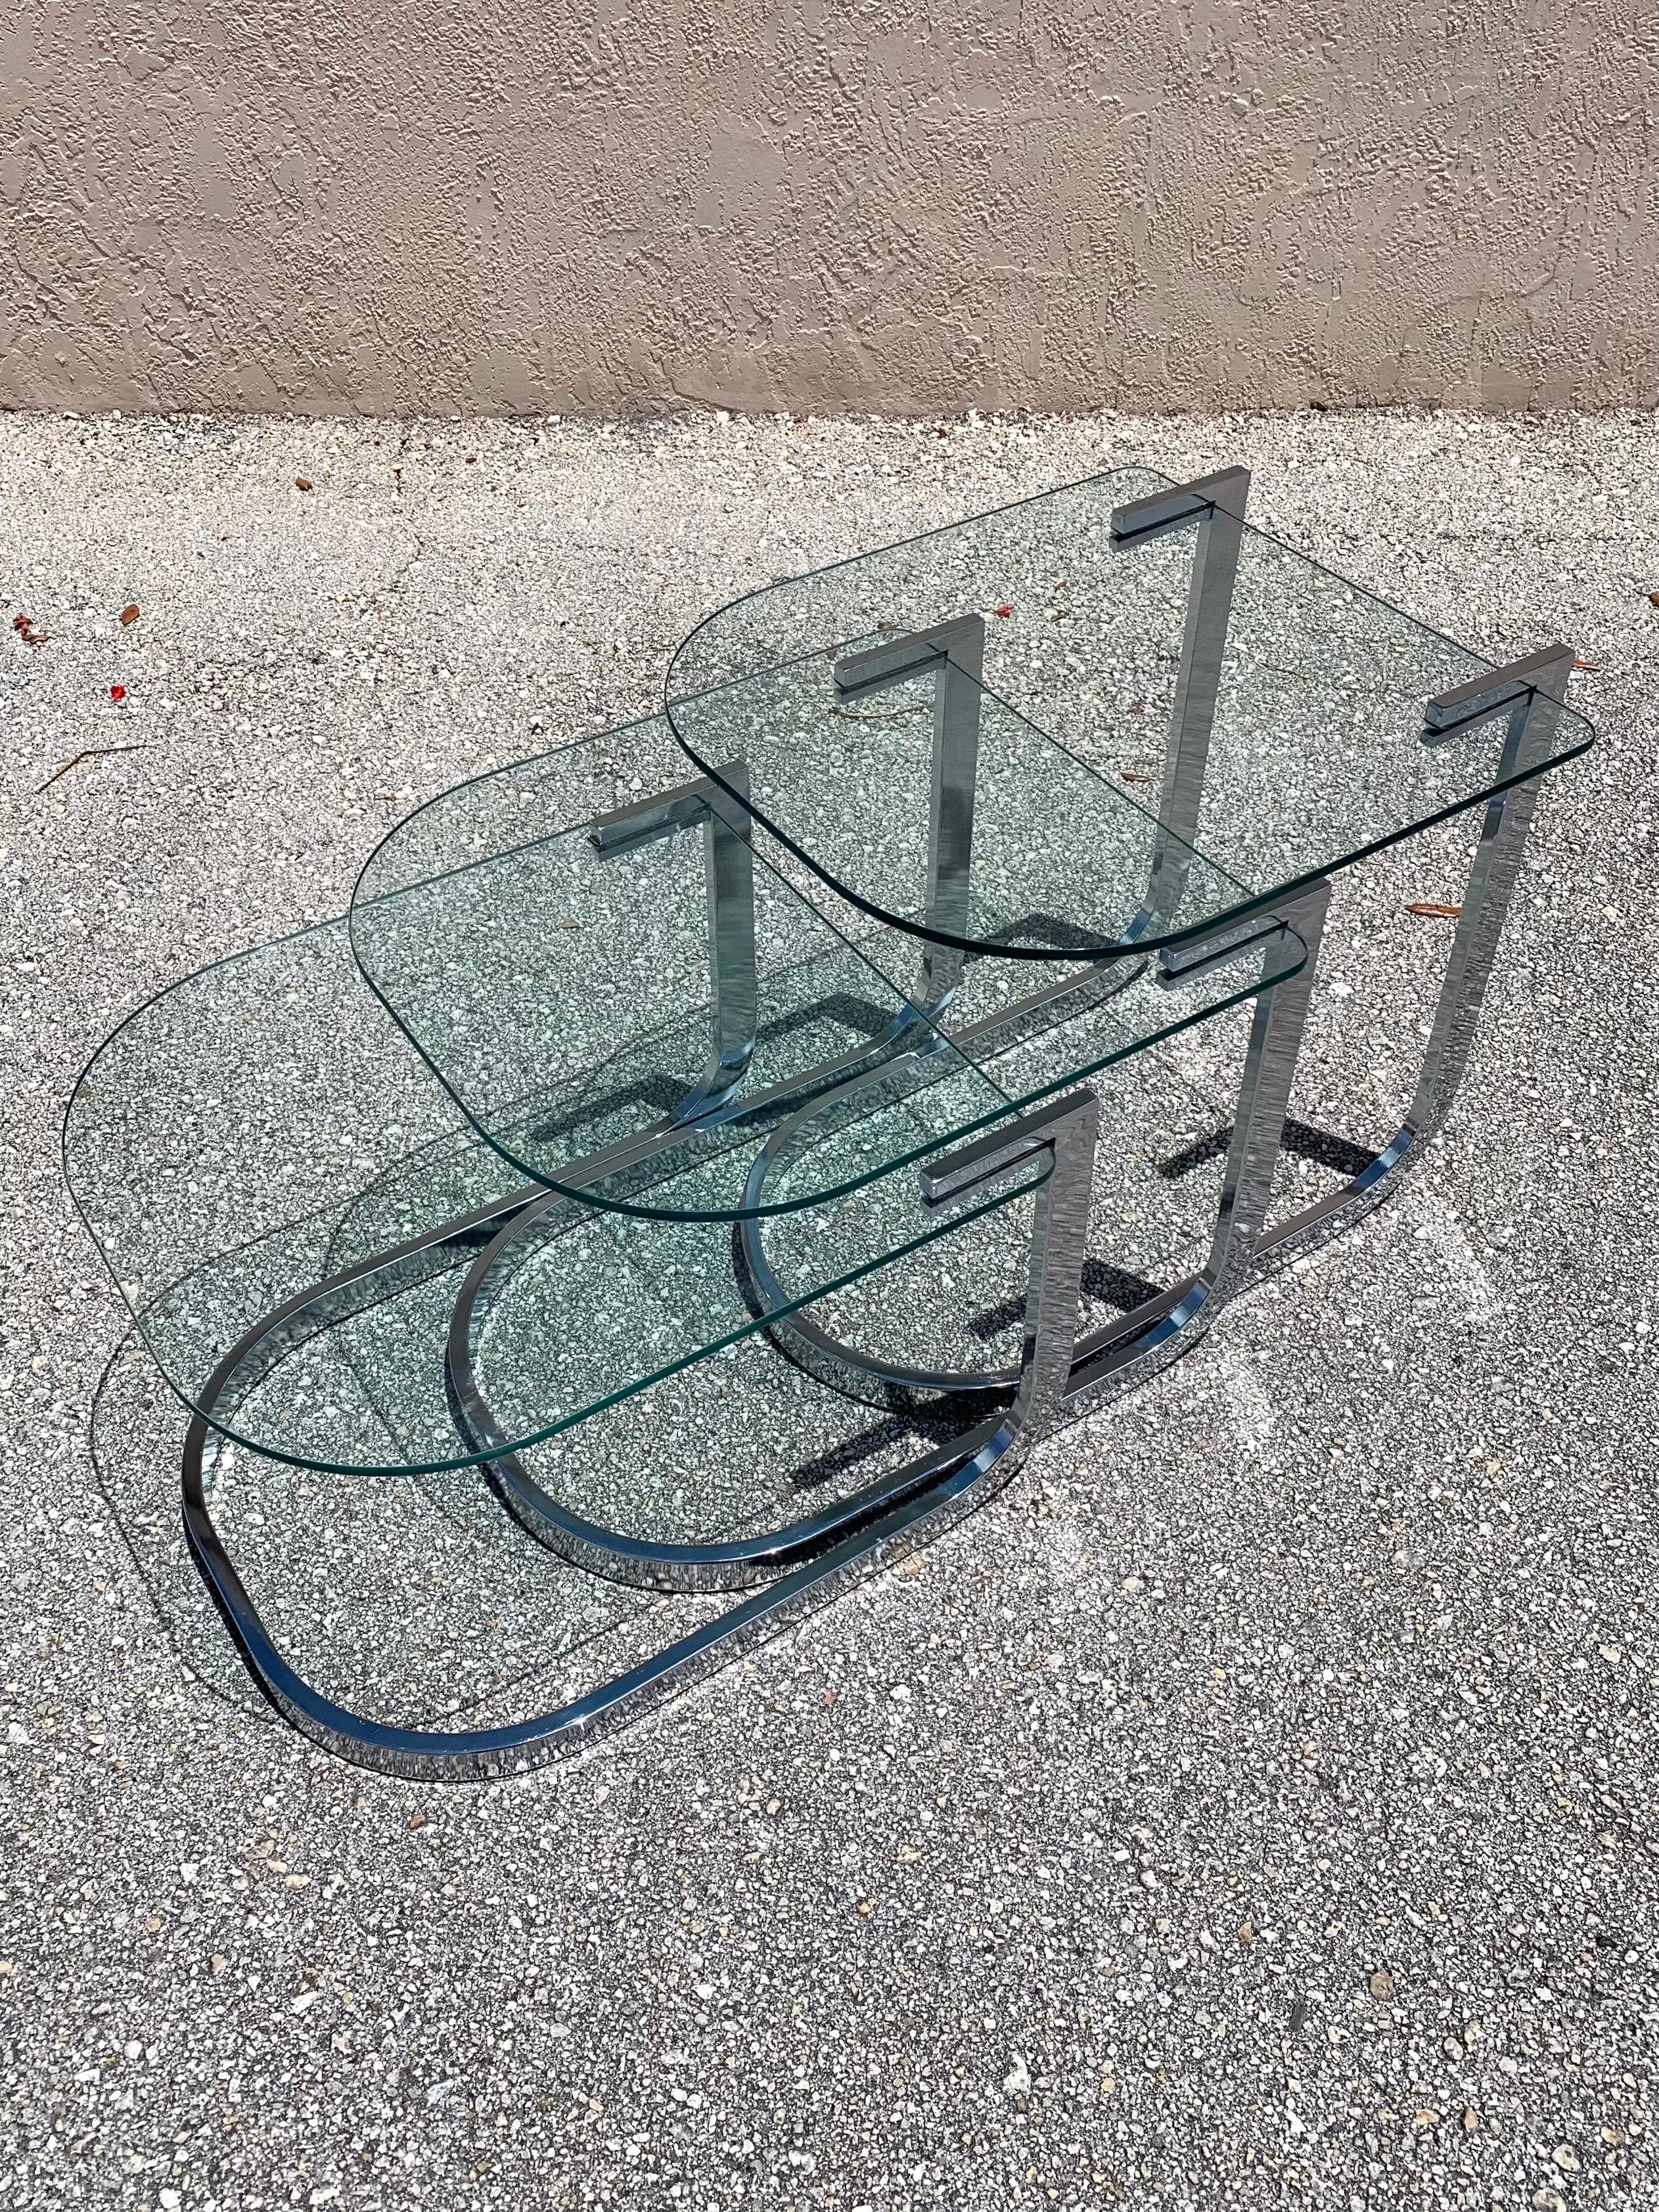 A set of 3 chrome and glass nesting tables by Design Institute of America. Clean and flowing design that looks good stacked together or spread out. Would make a great multi tiered coffee table as well. Flowing chrome frame with a floating glass